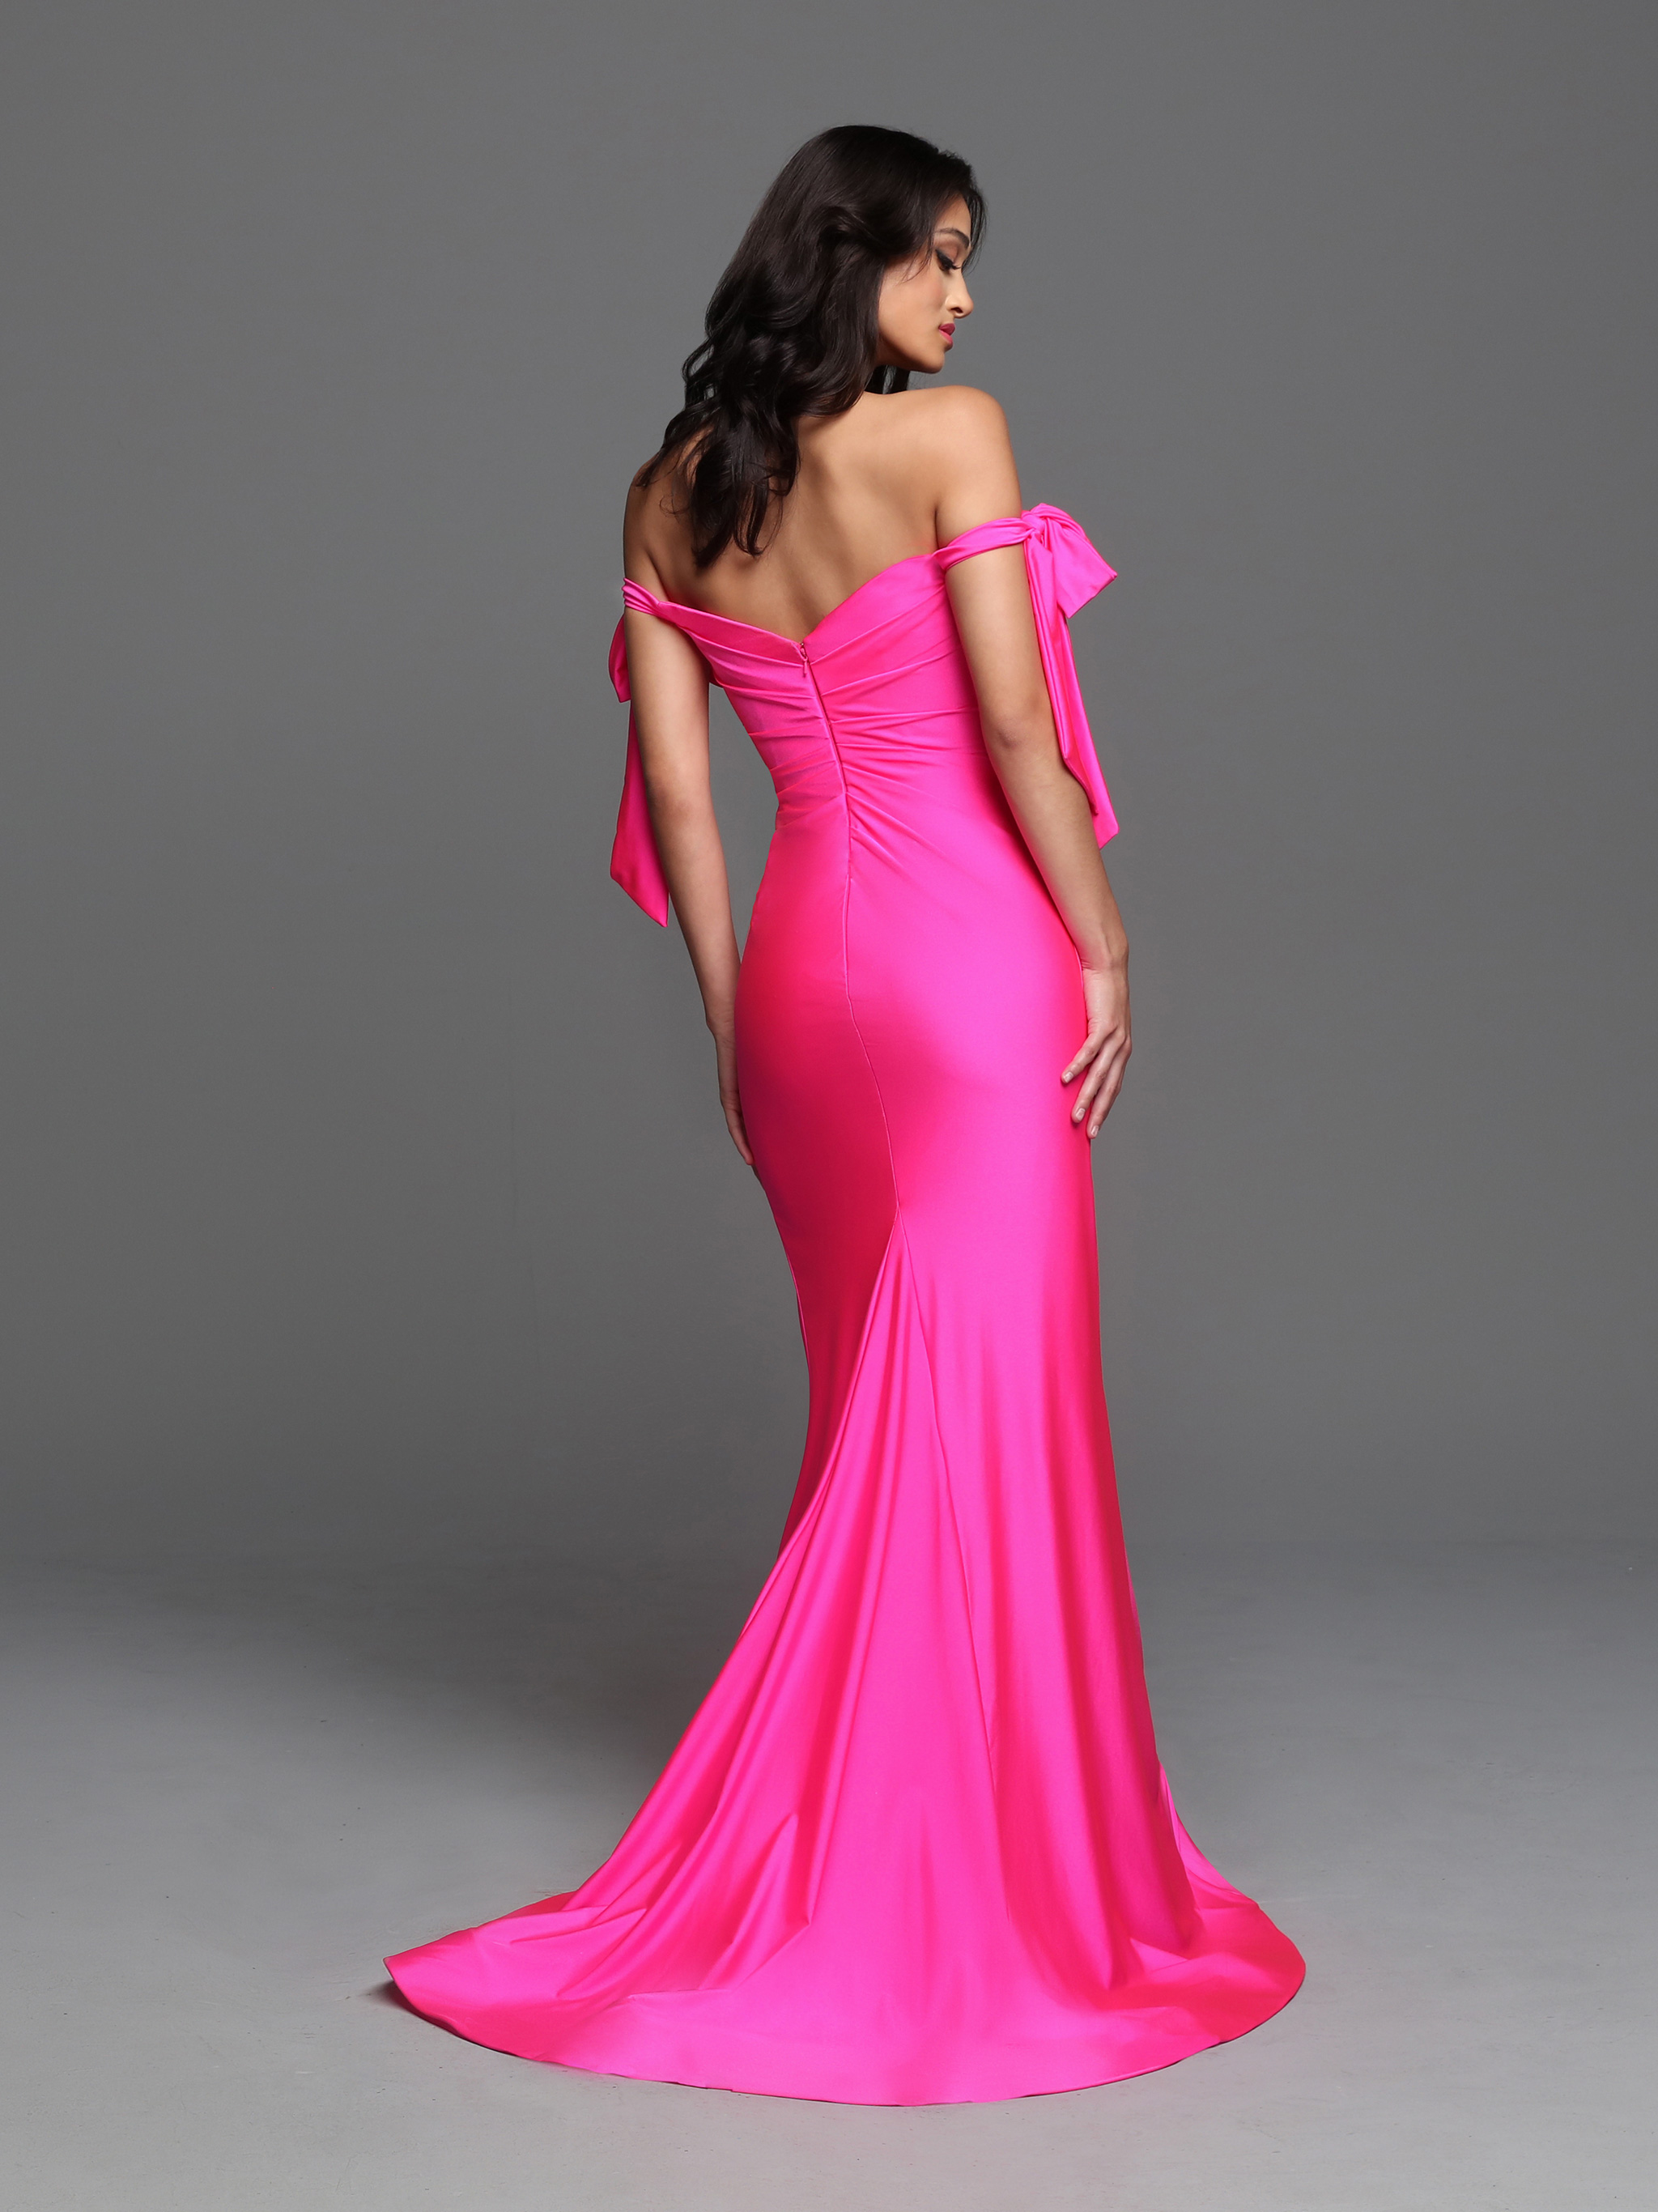 Image showing back view of style #72263